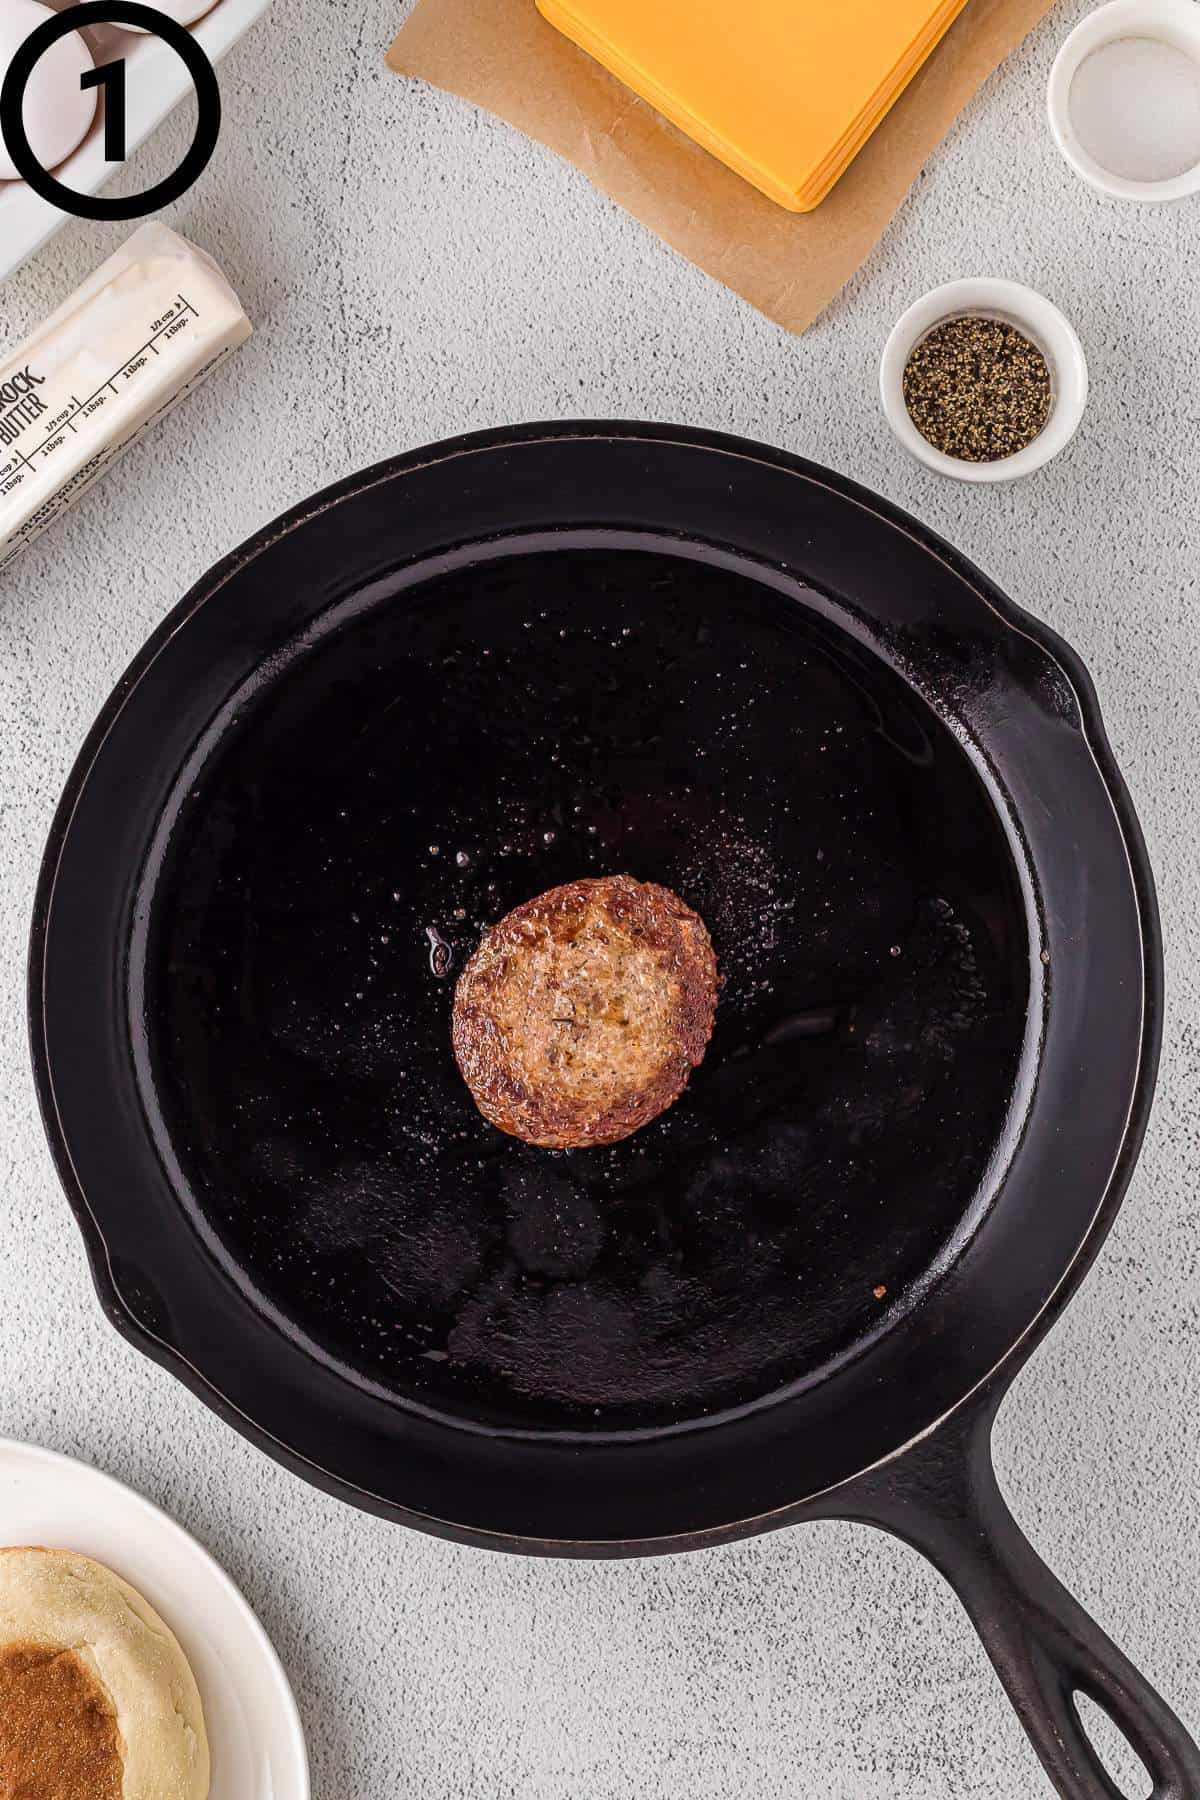 Cooked sausage on a cast iron skillet.